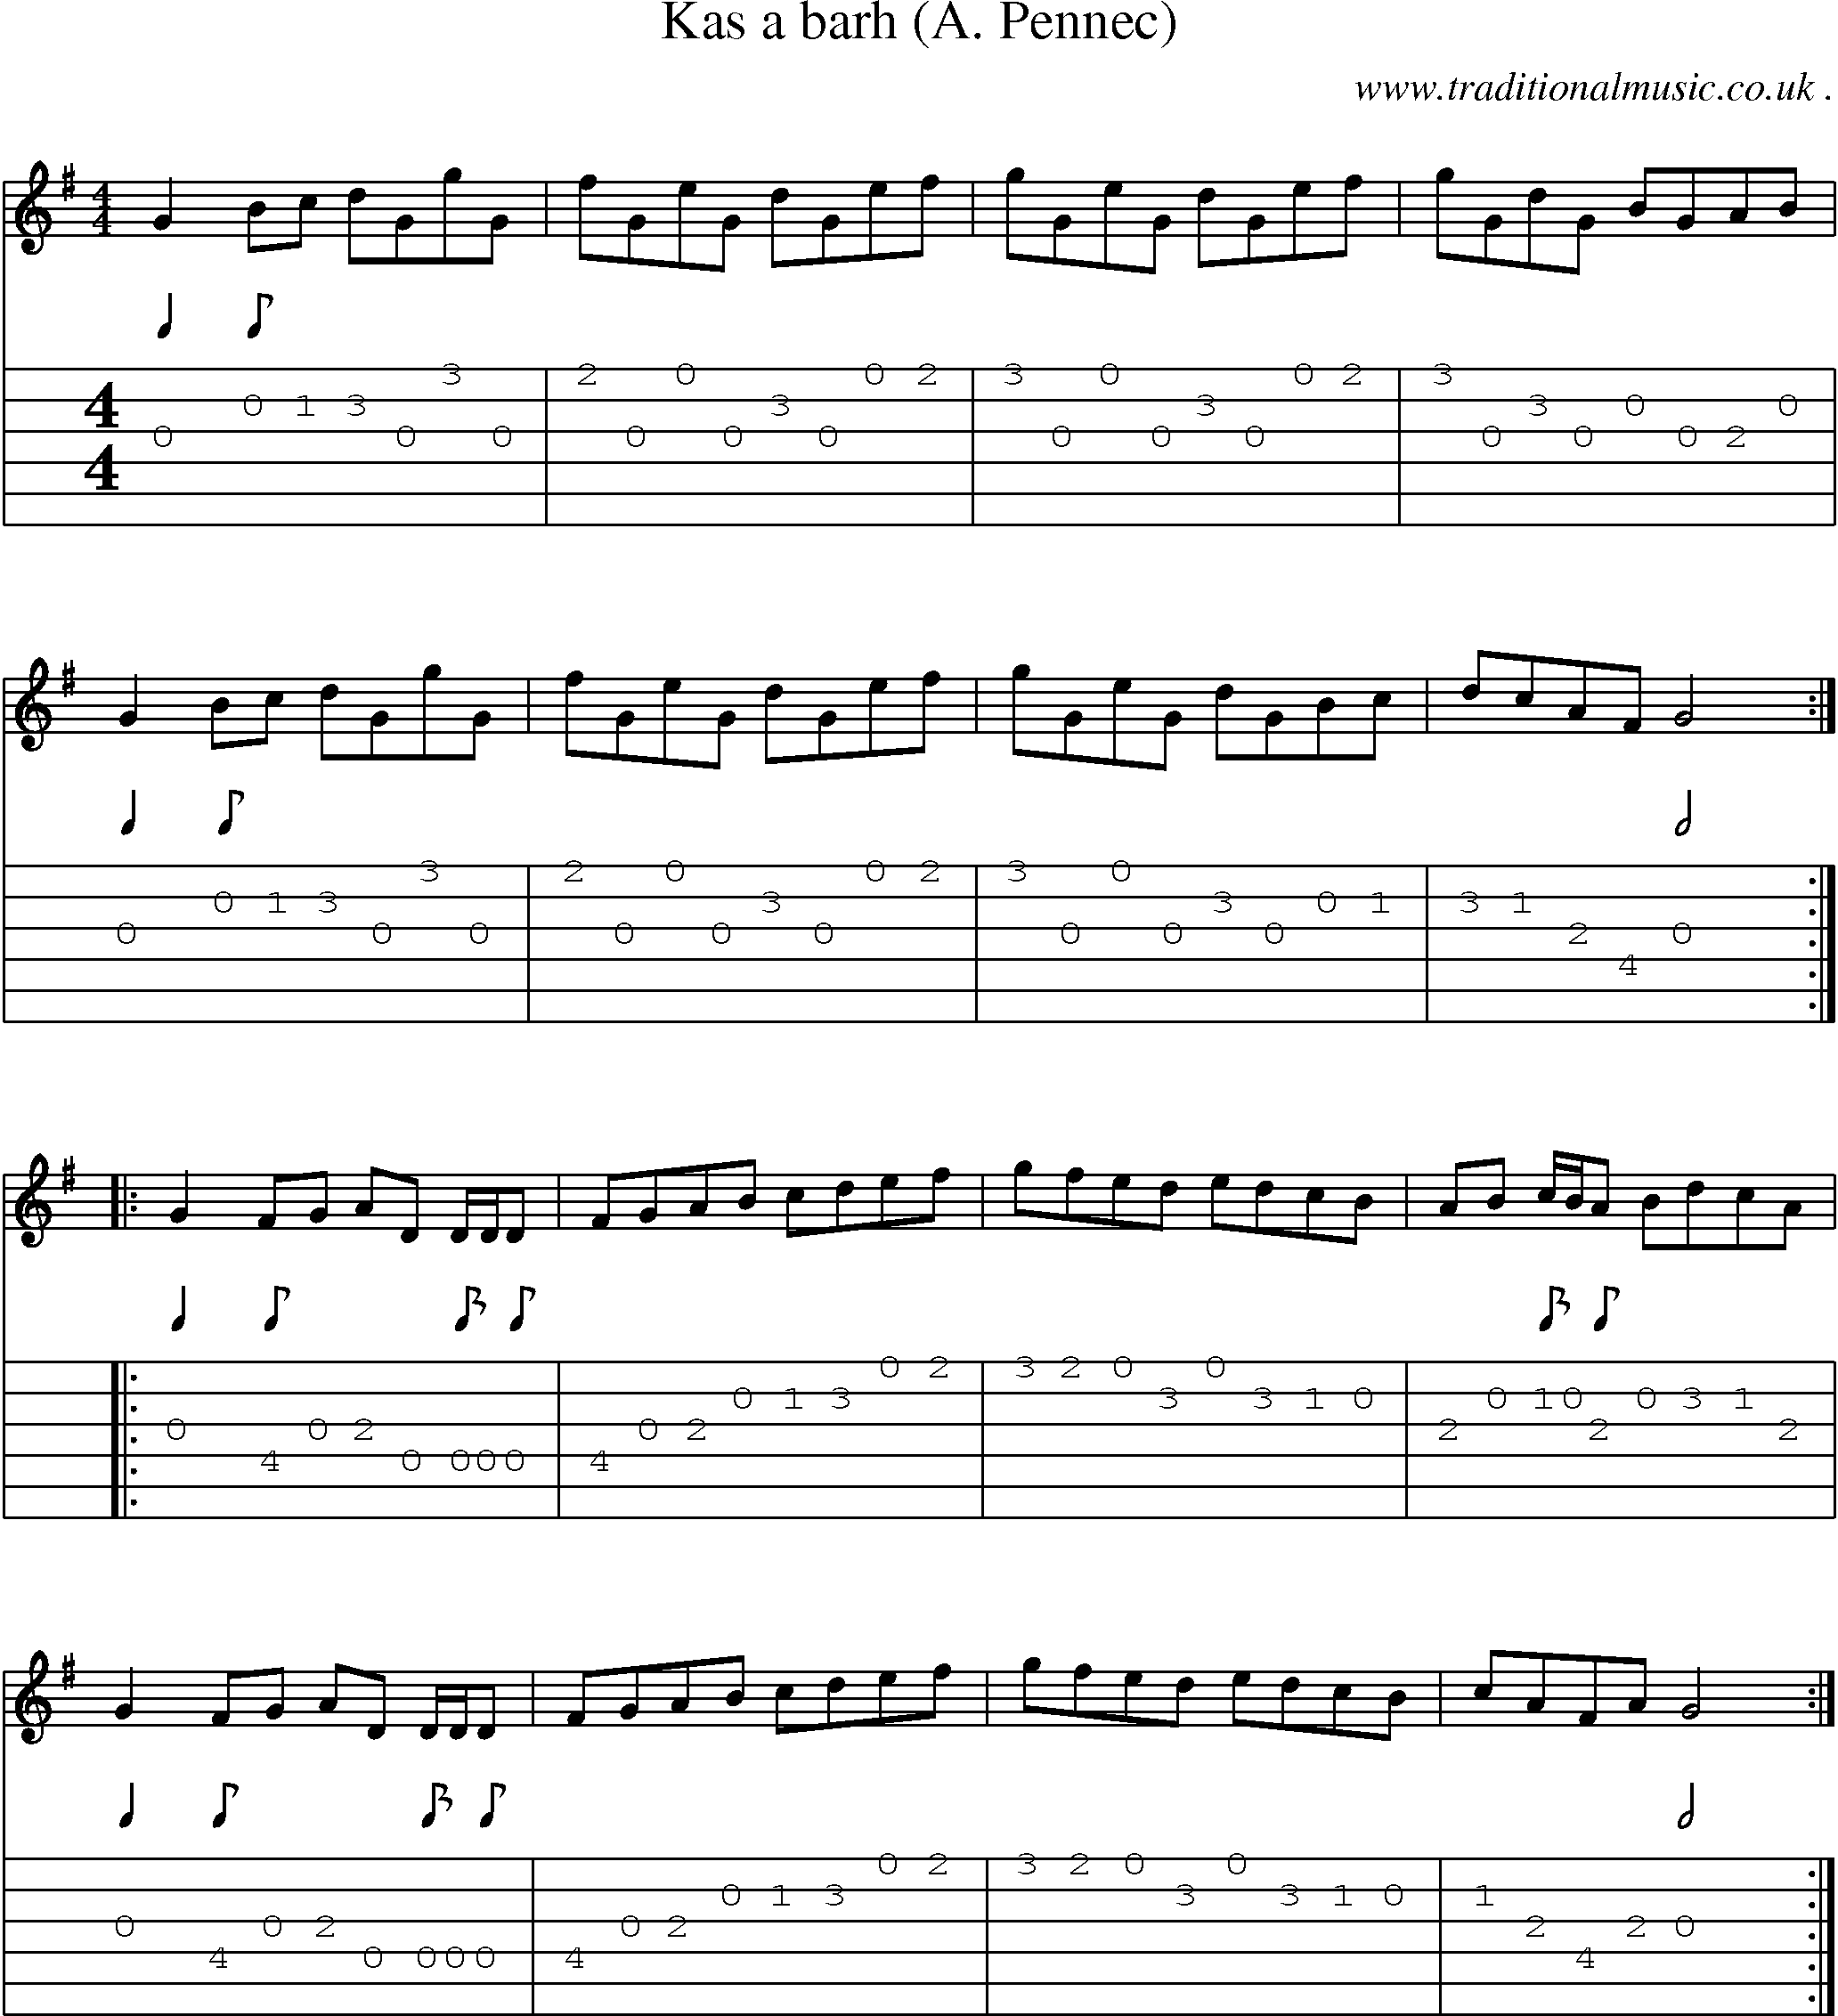 Sheet-Music and Guitar Tabs for Kas A Barh (a Pennec)